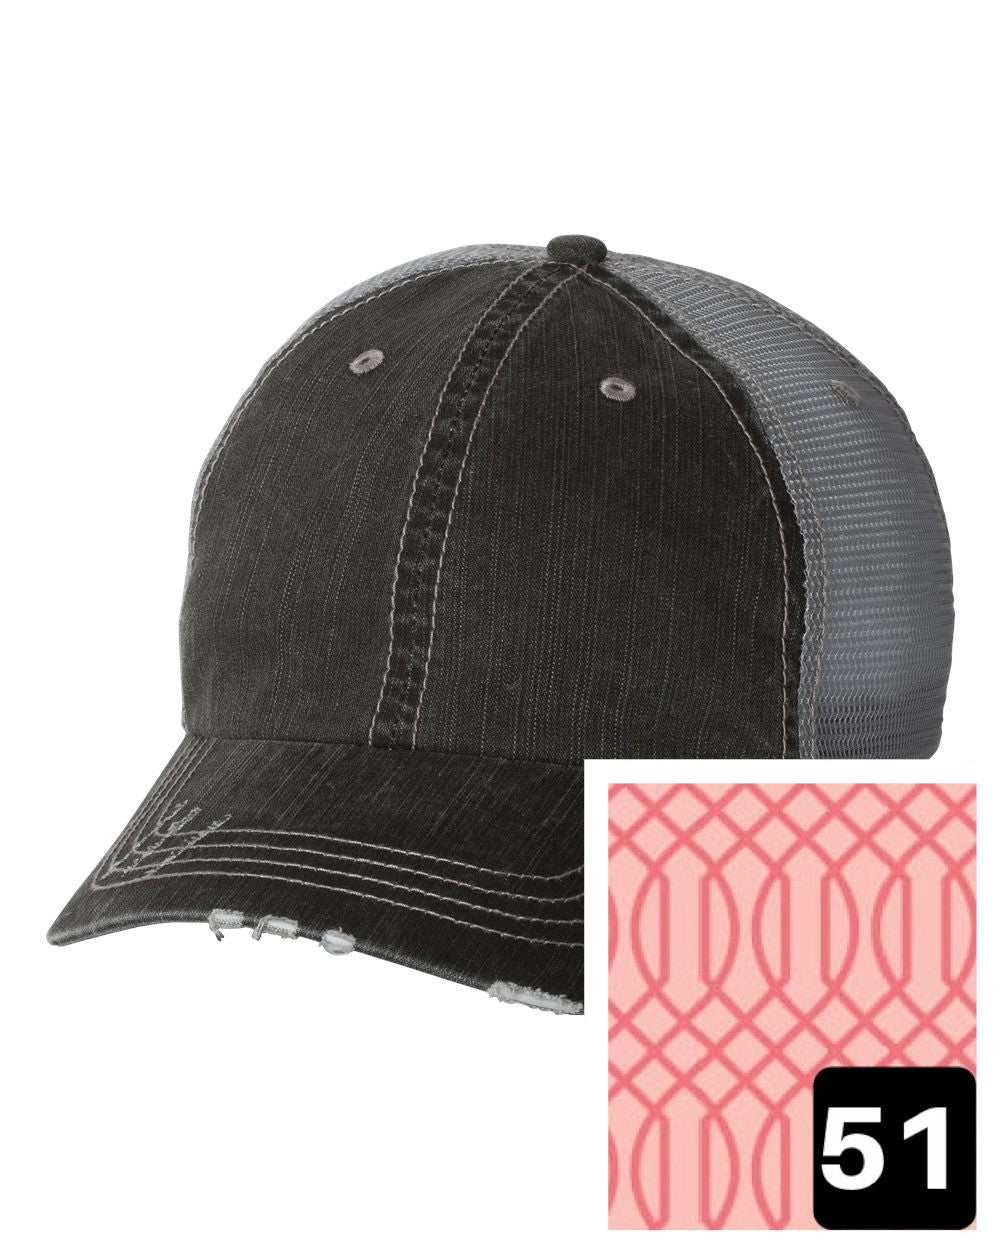 gray distressed trucker hat with white on gray hatch fabric state of Utah